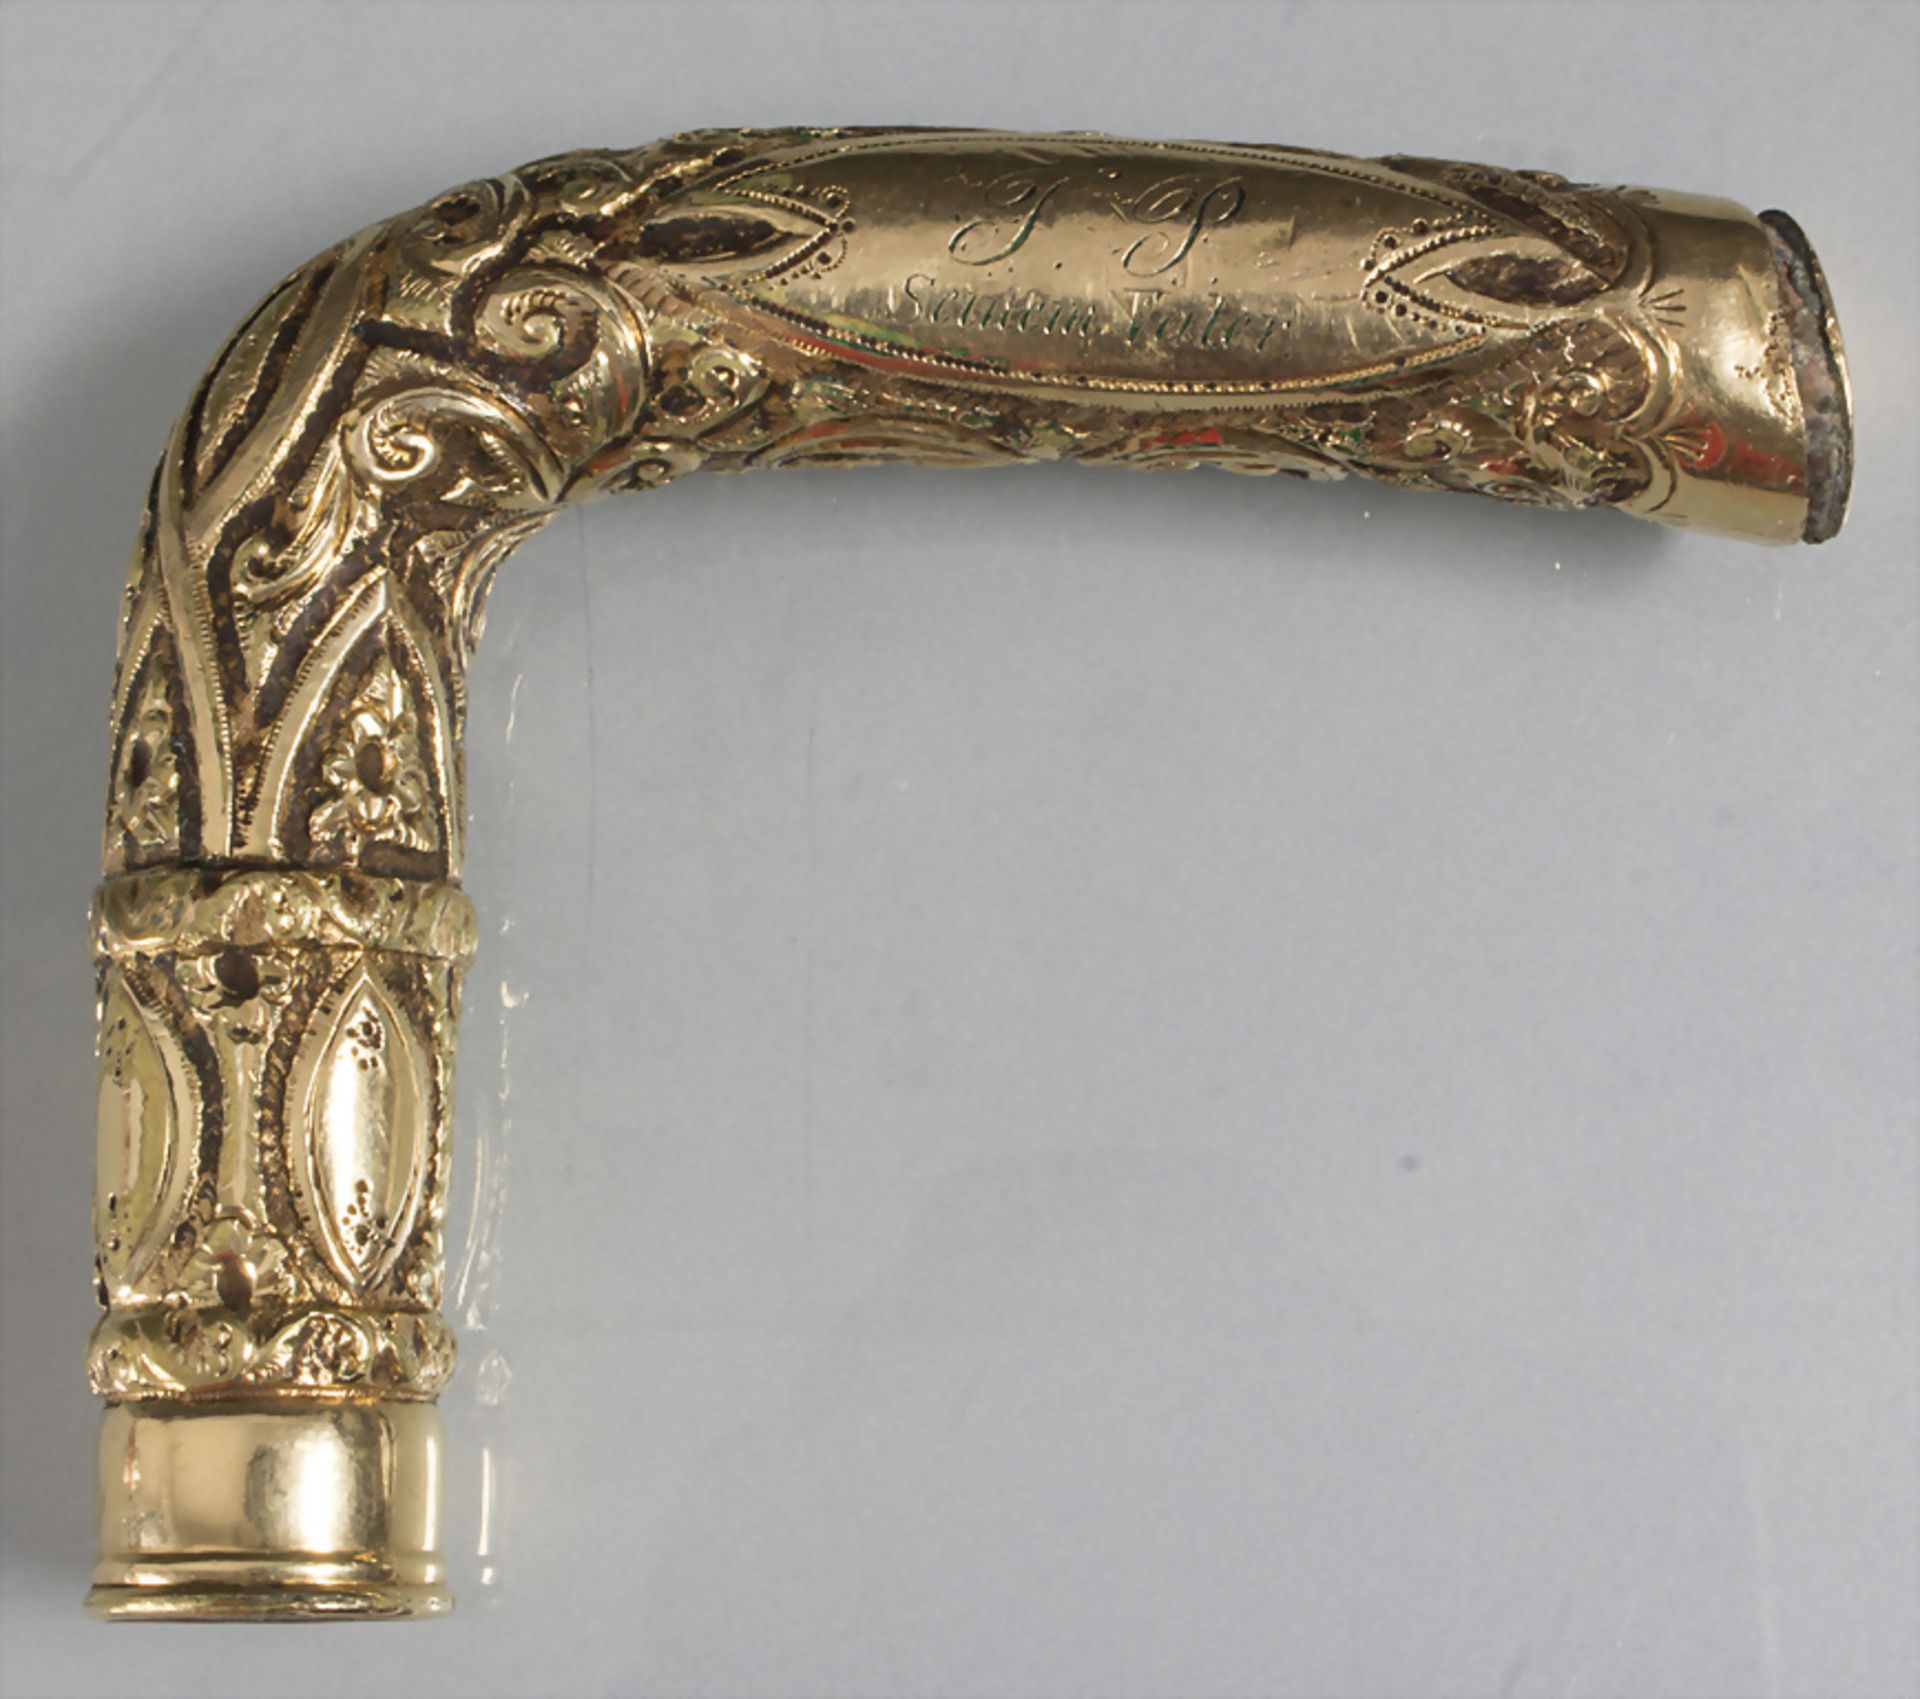 Stockknauf / A cane handle with 14ct gold